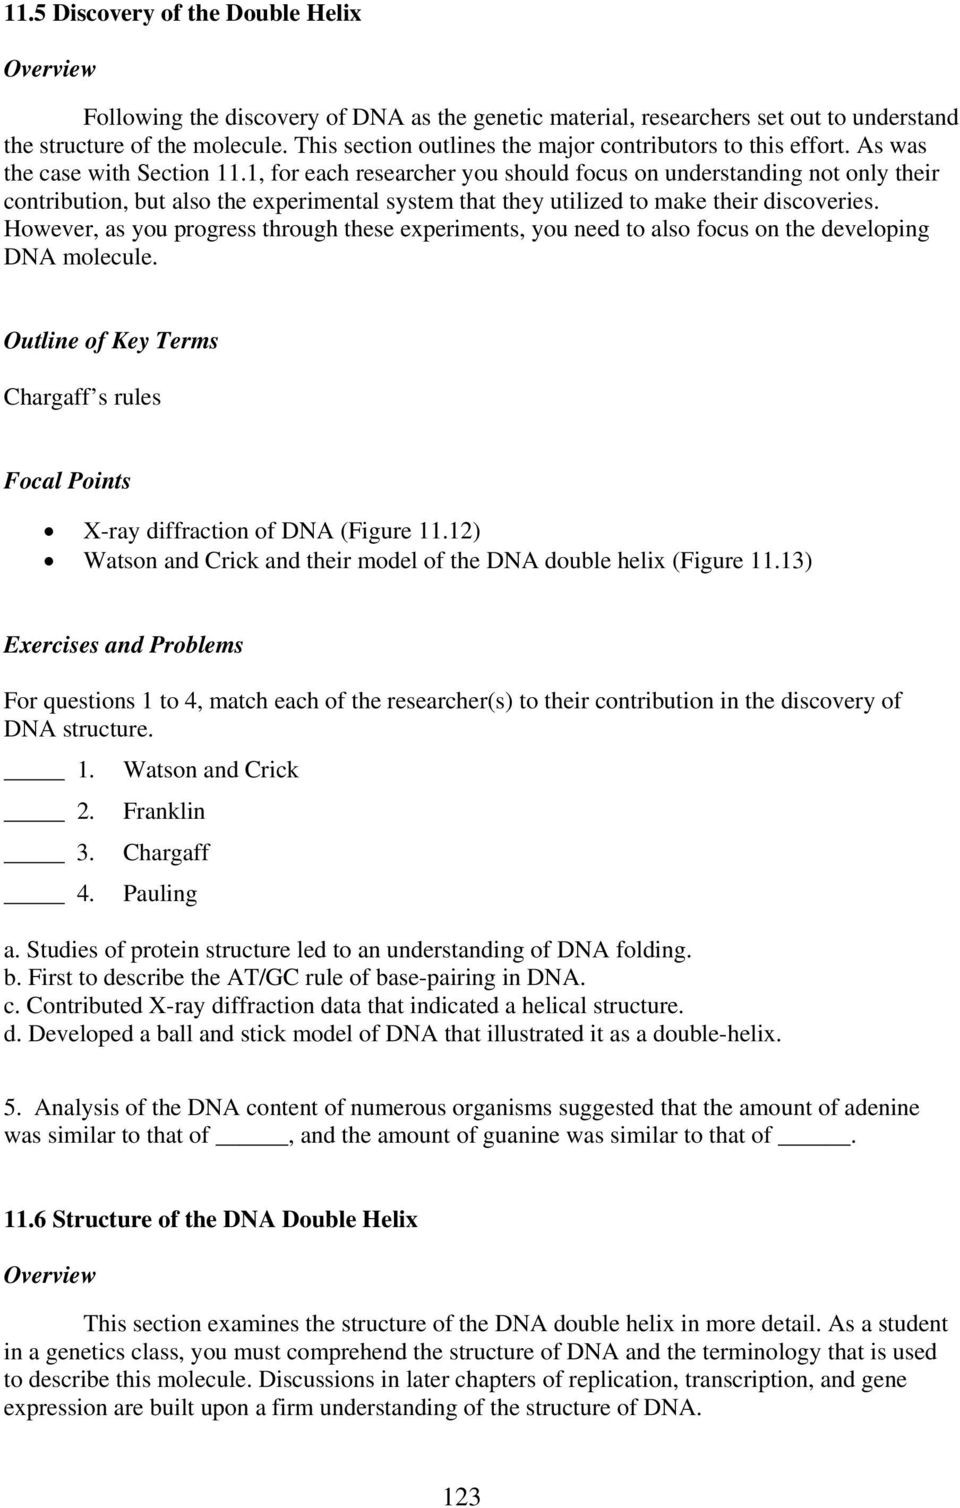 Dna the Double Helix Worksheet Chapter 11 Molecular Structure Of Dna and Rna Pdf Free